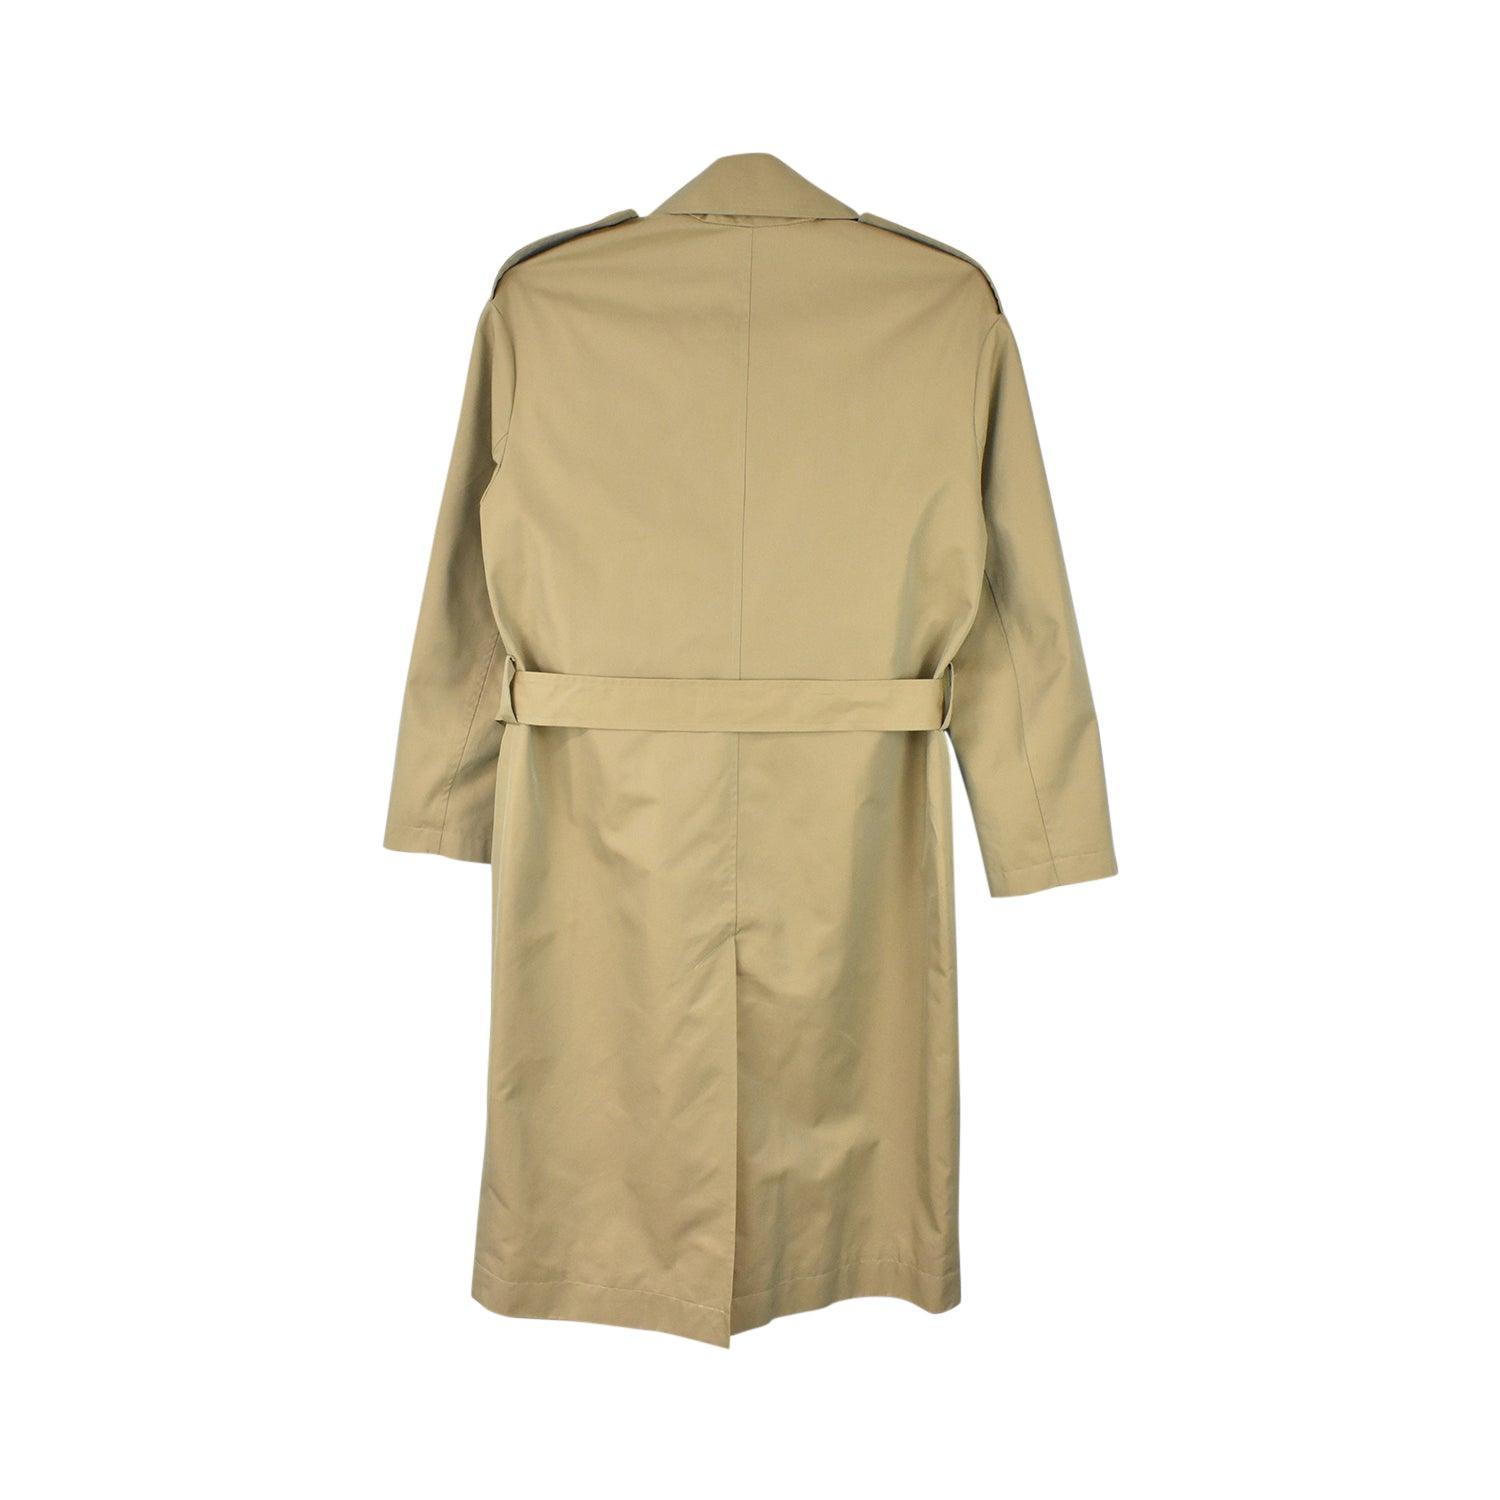 Maje Trench Jacket - Women's 0 - Fashionably Yours